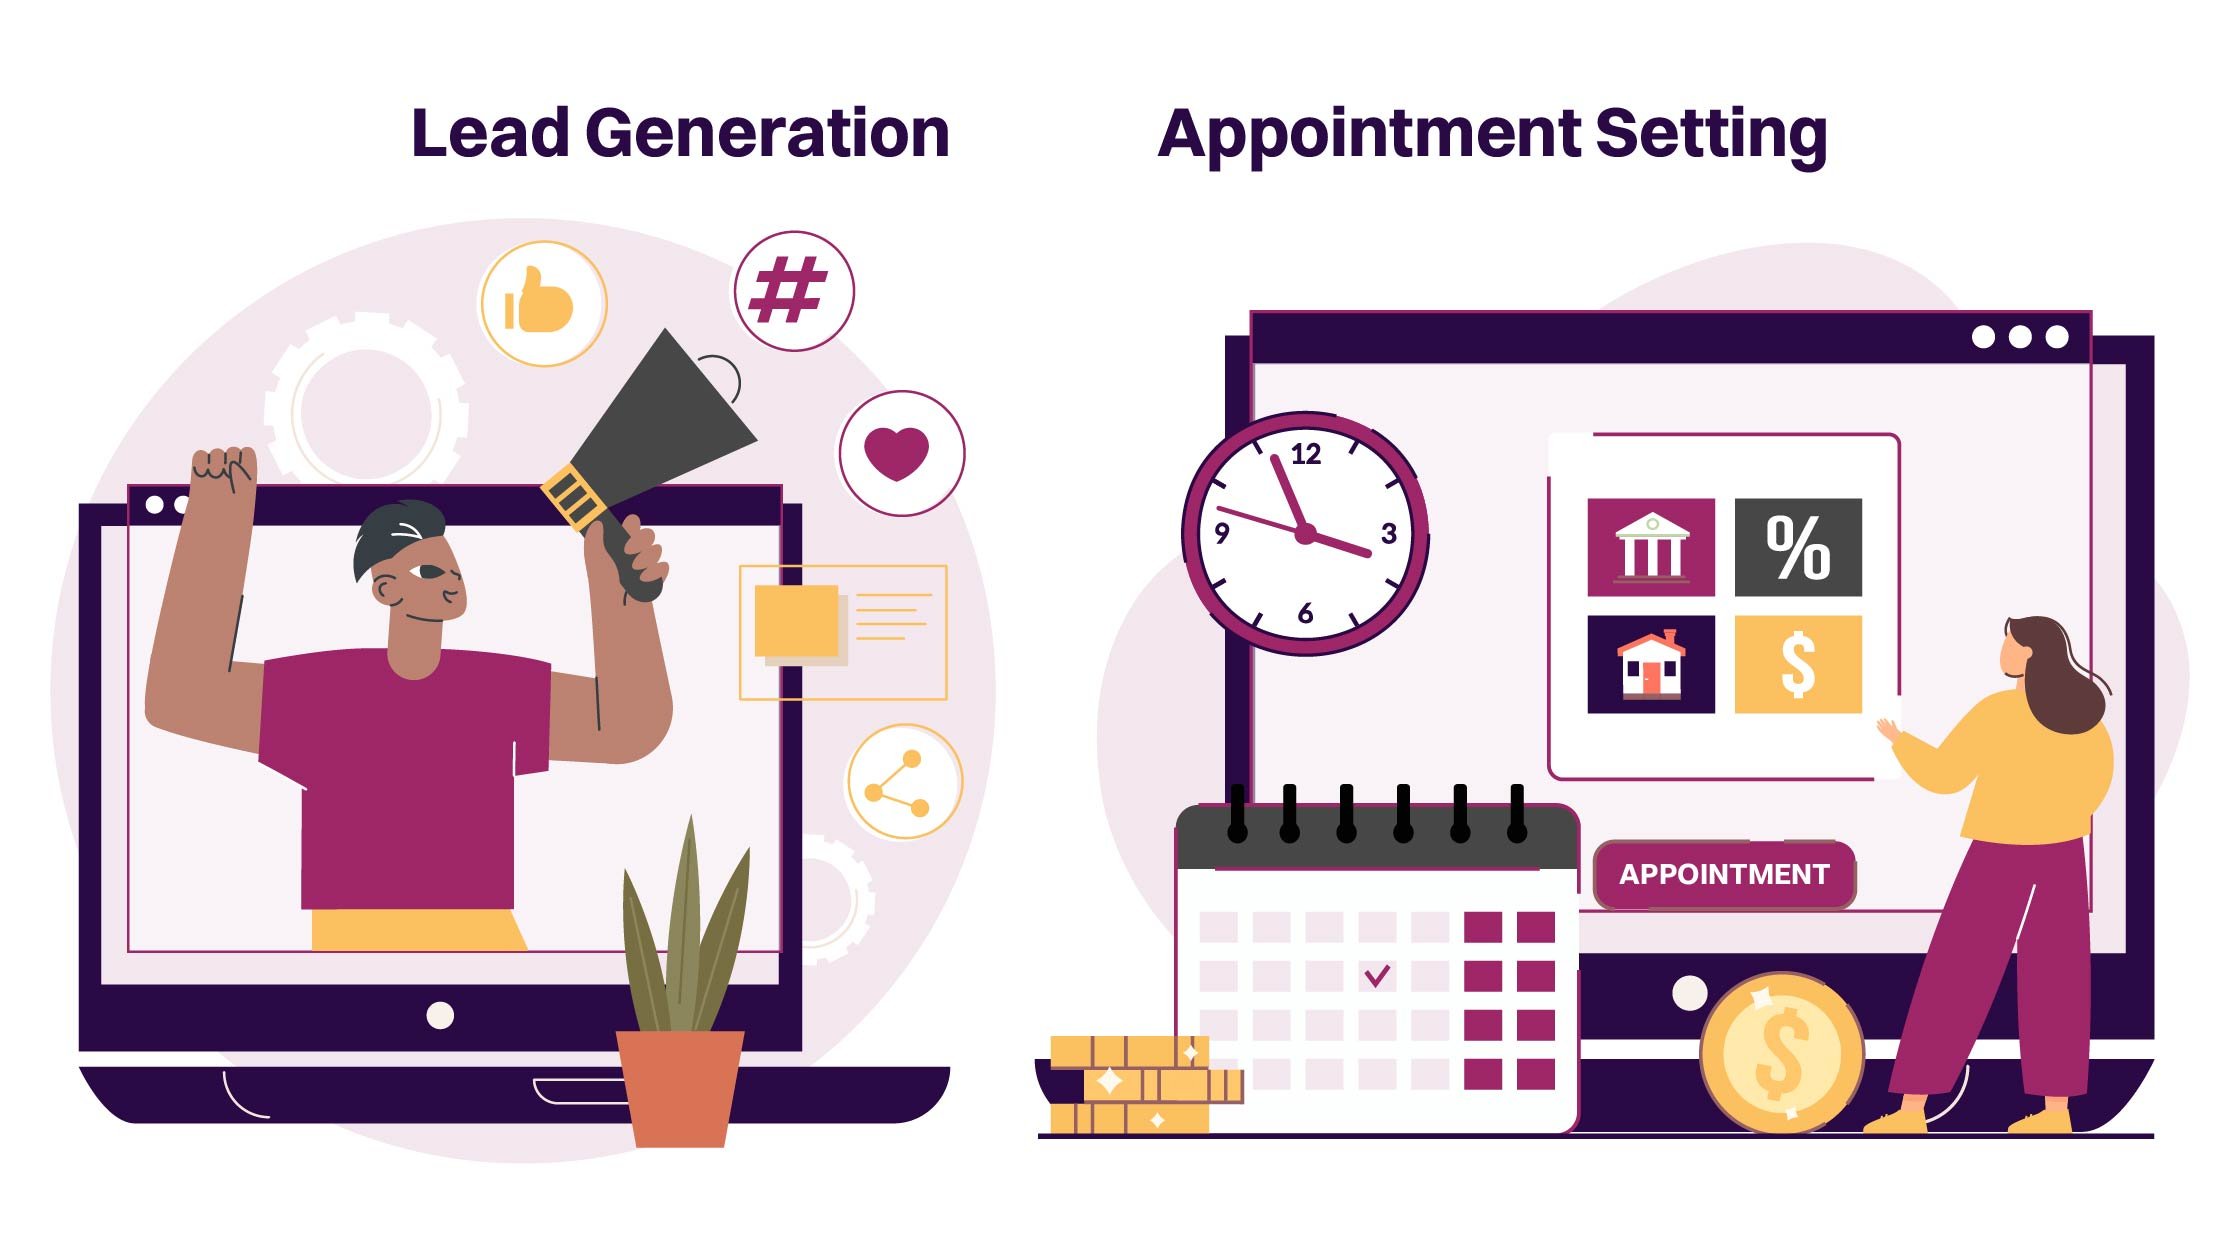 Differences Between Lead Generation and Appointment Setting